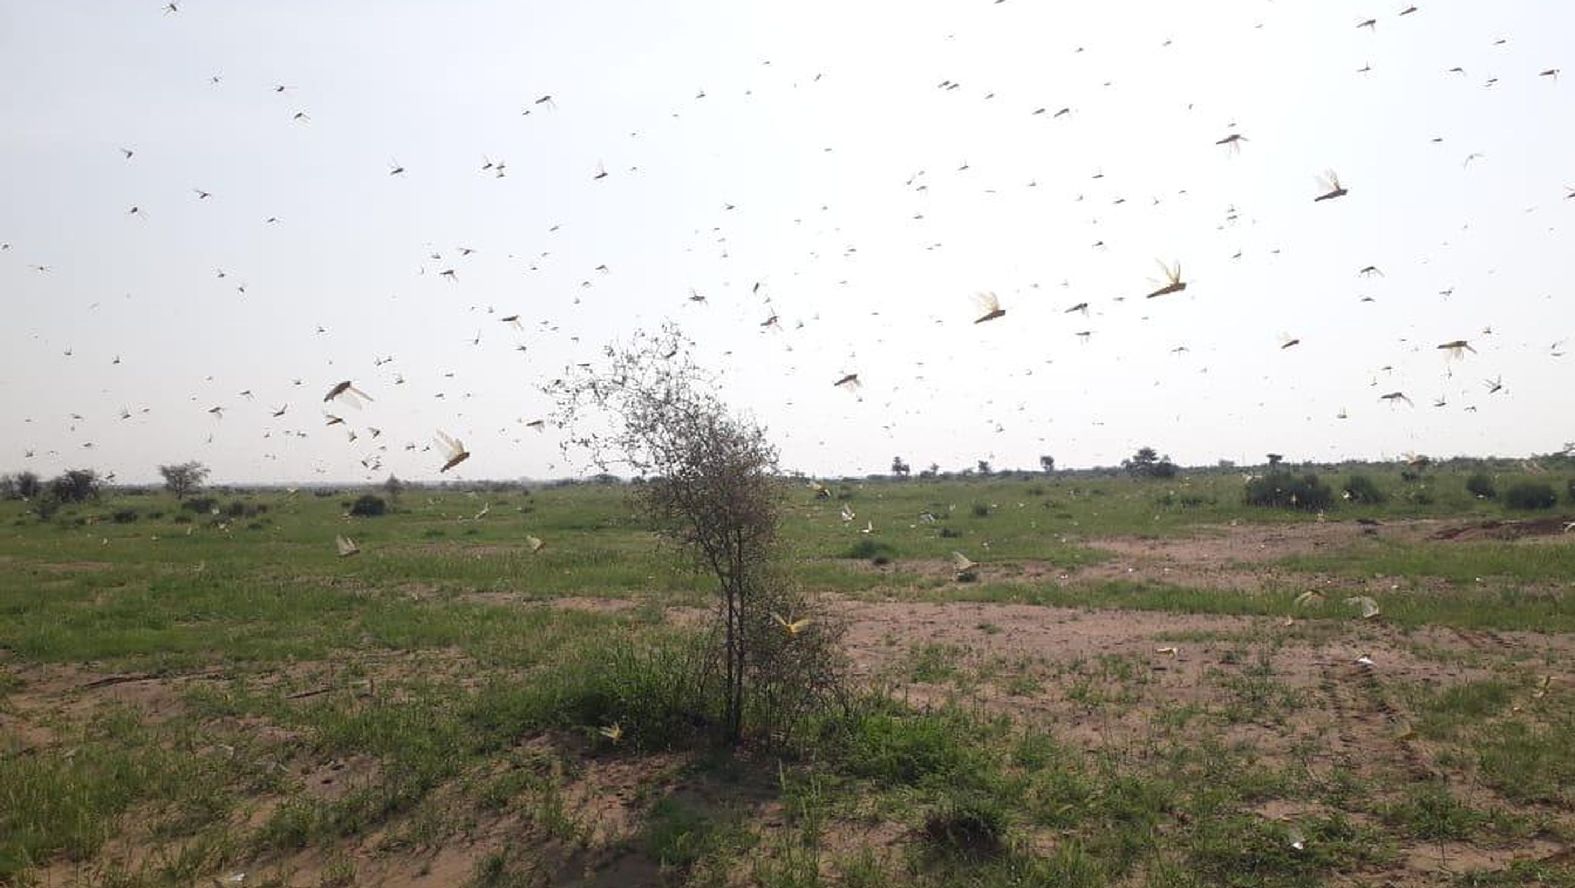 Farmers concerned about continued flow of locusts groups in jaisalmer